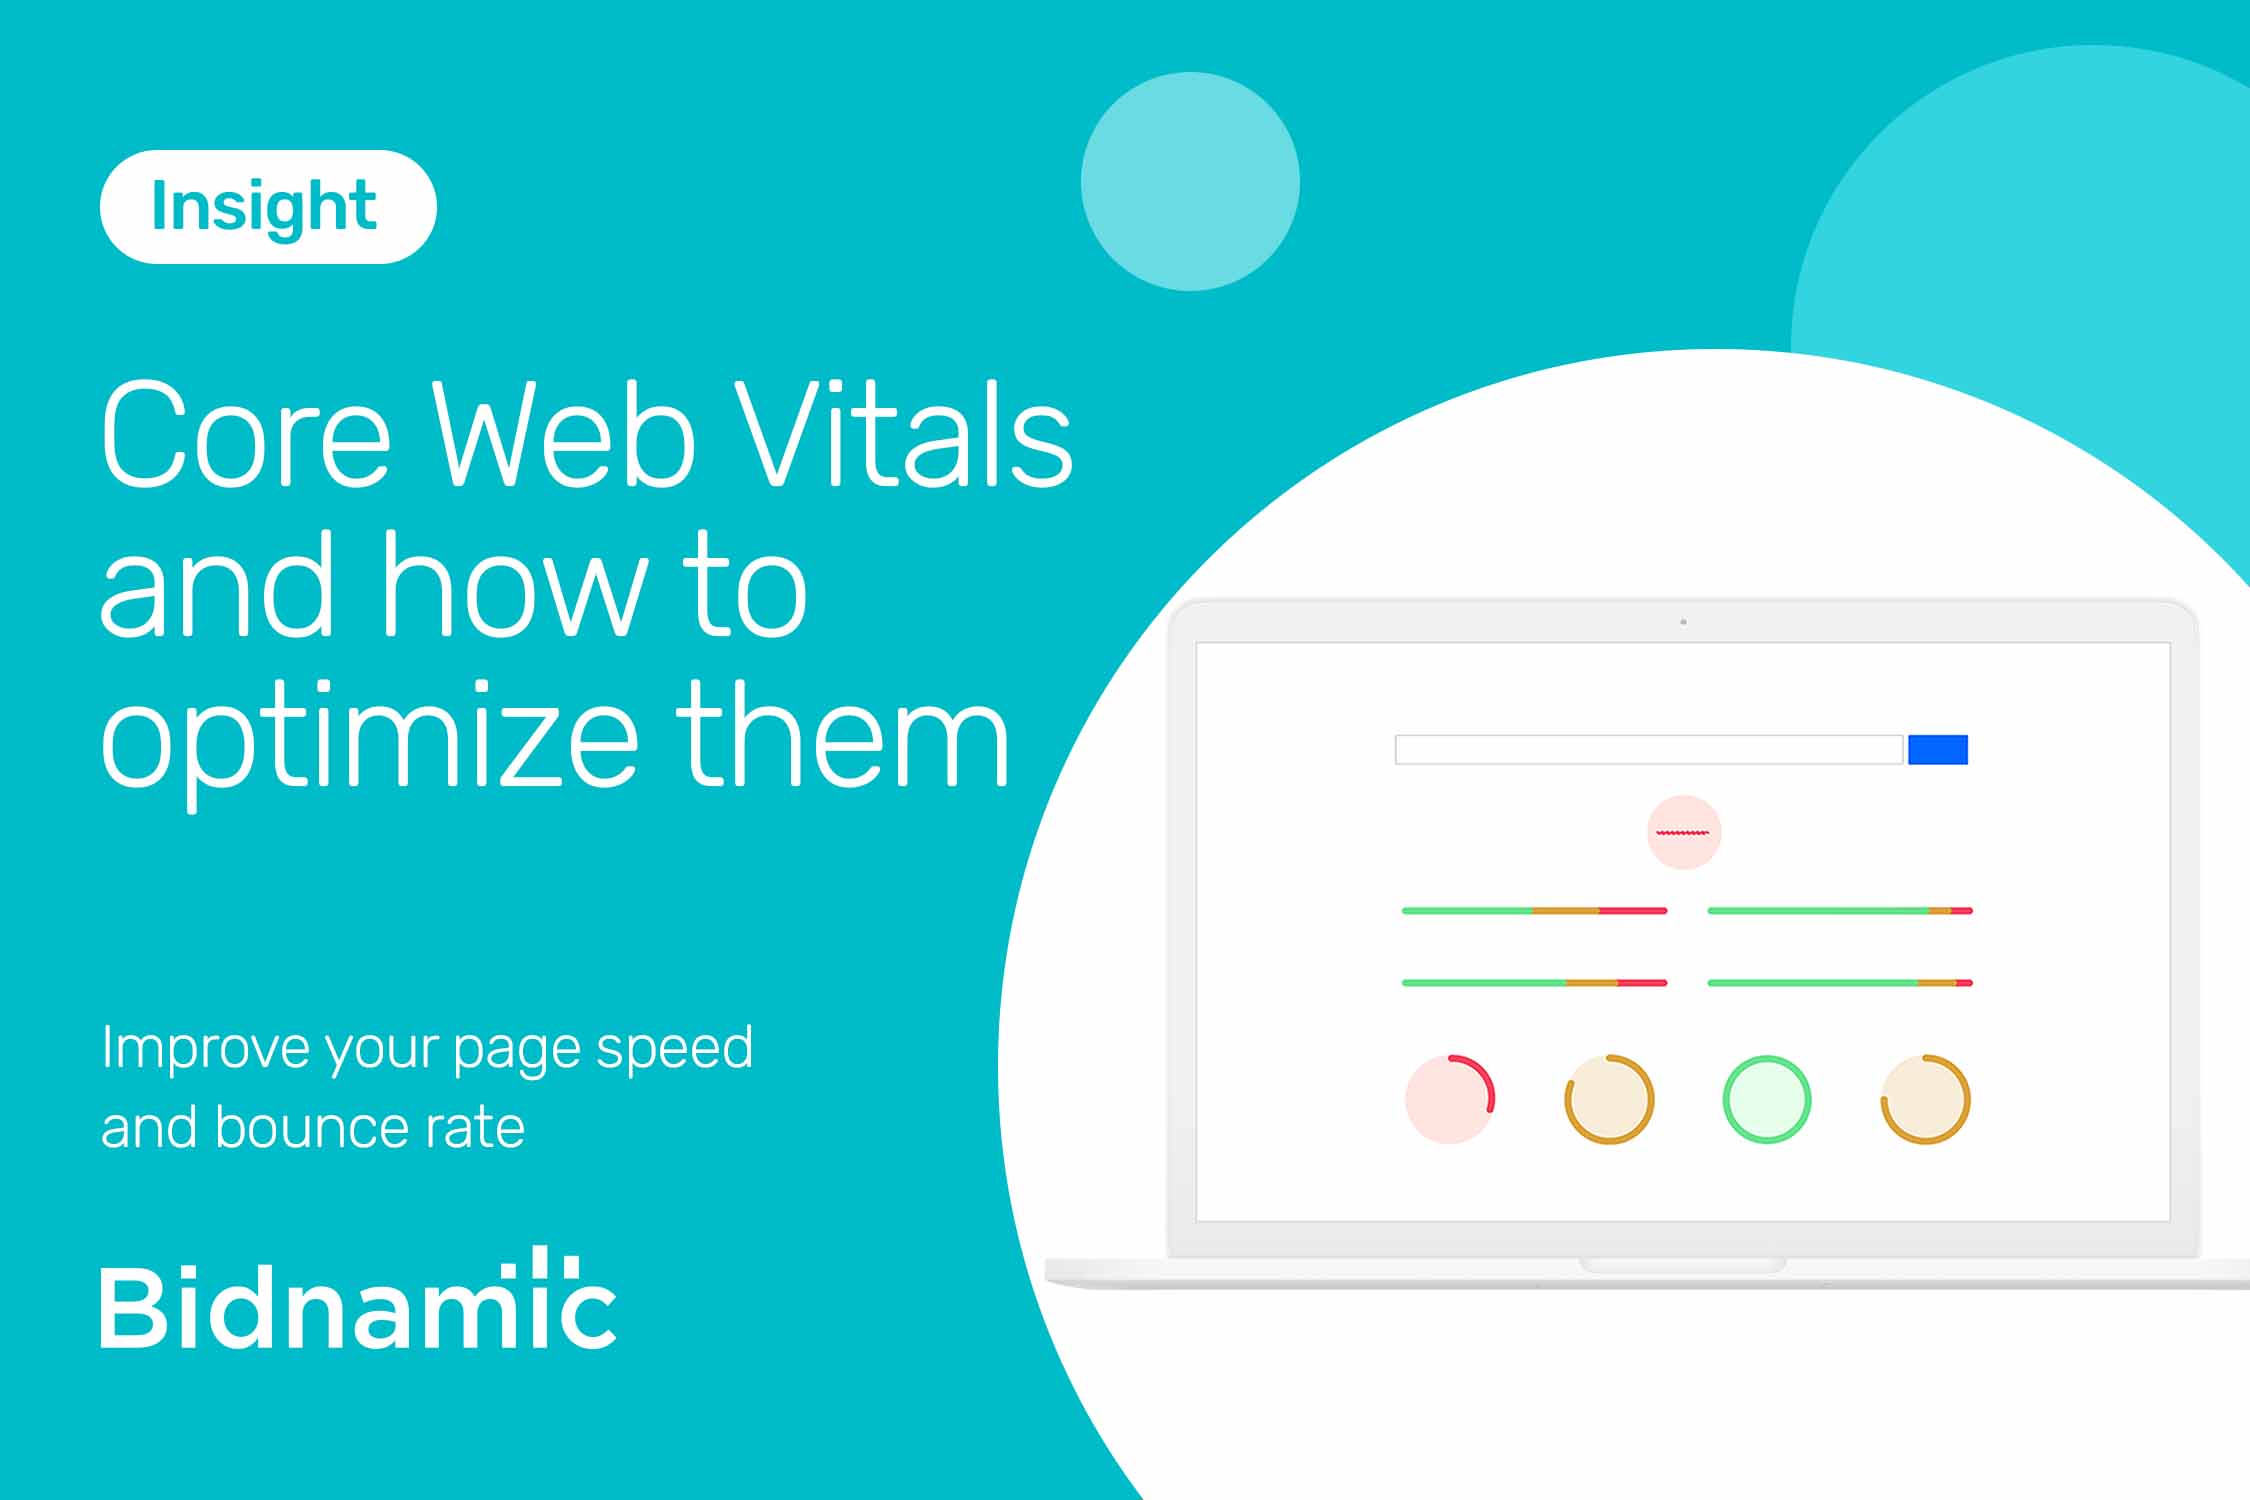 Optimizing Core Web Vitals for page speed and bounce rate